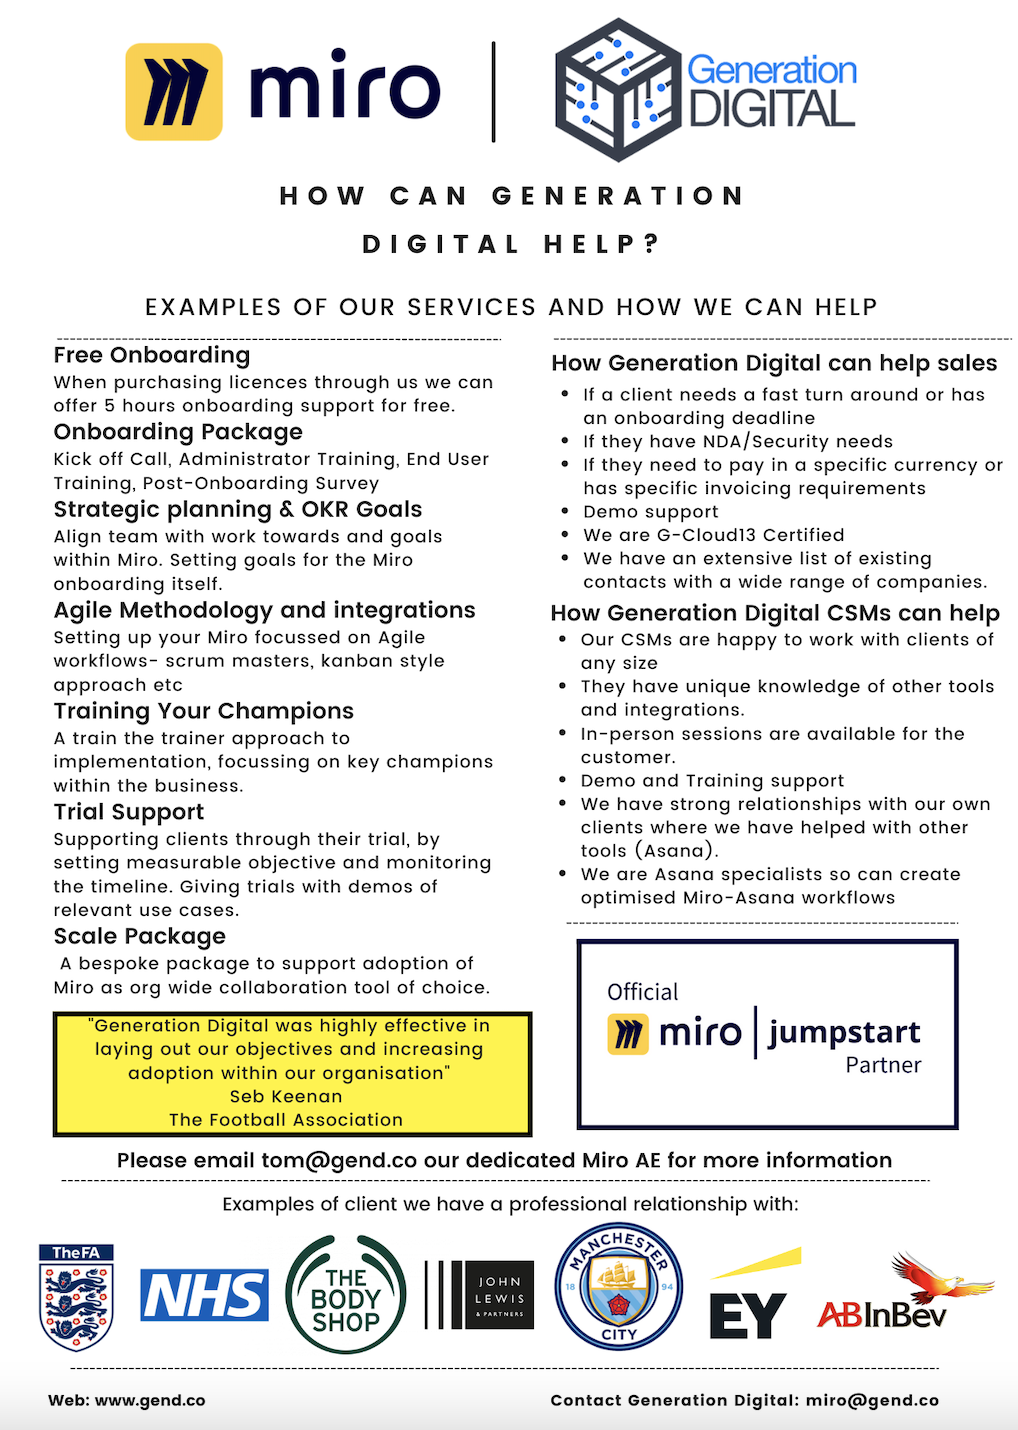 A brochure of what Generation Digital can offer through Miro. 